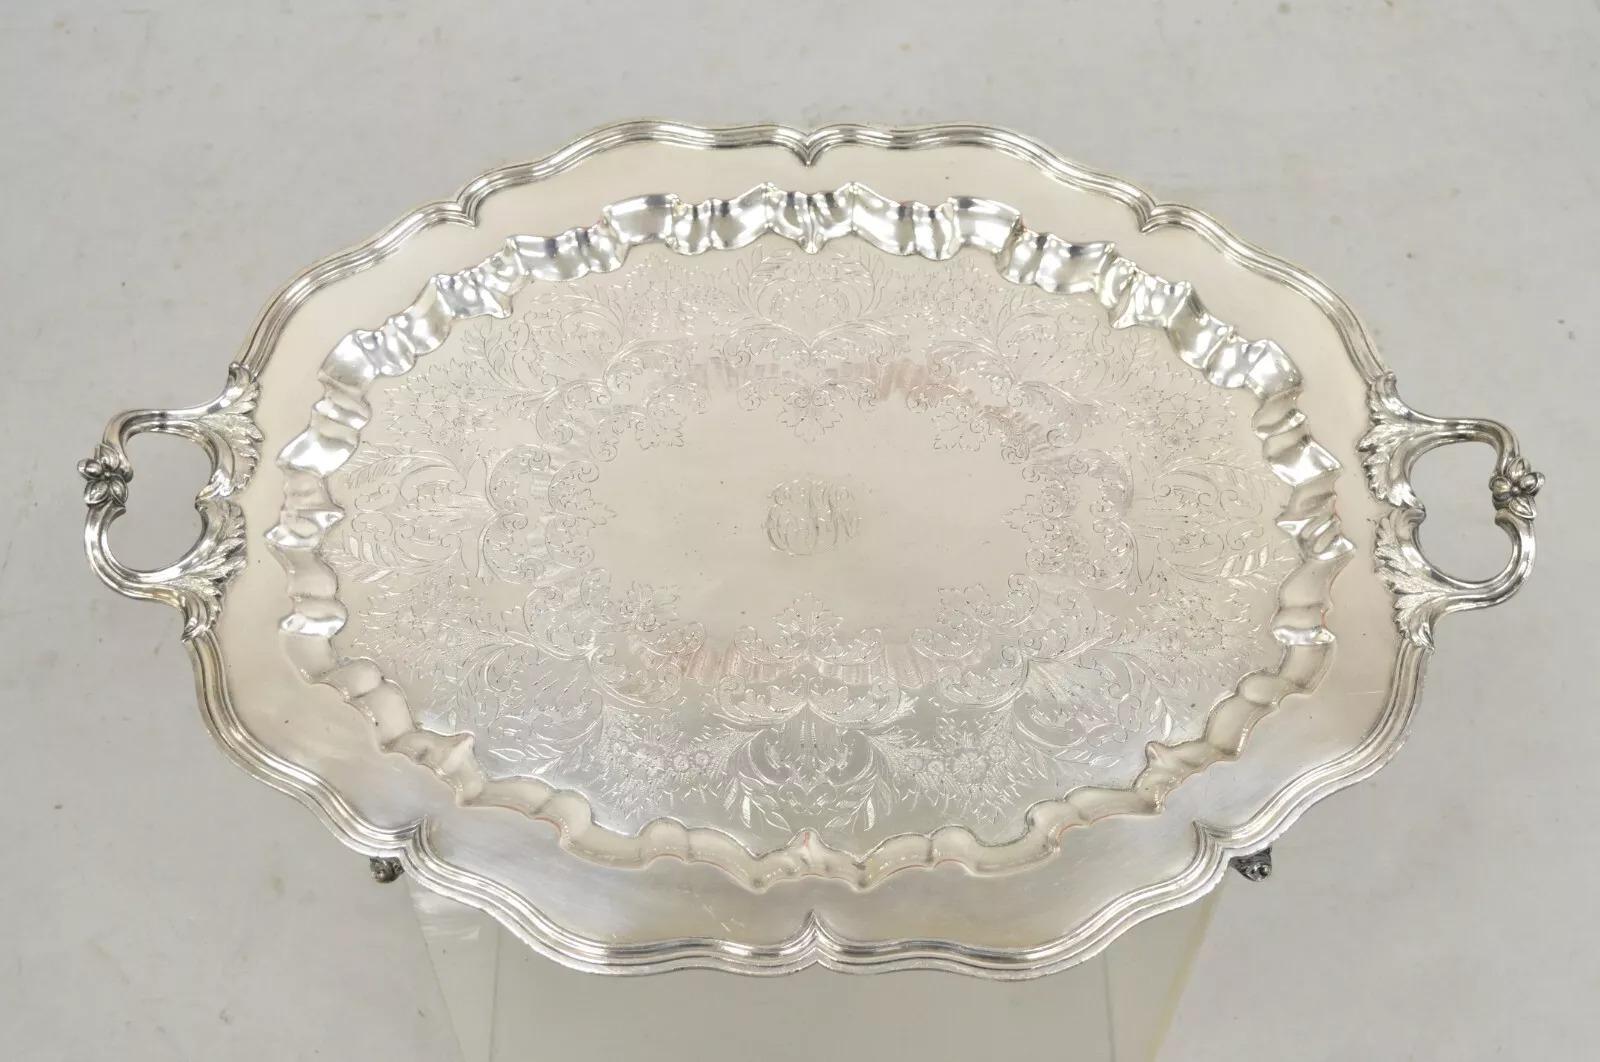 Antique Victorian English Sheffield Silver Plated Oval Scalloped Serving Platter Tray. Illegible monogram to center. Circa Late 20th Century. Measurements:  2